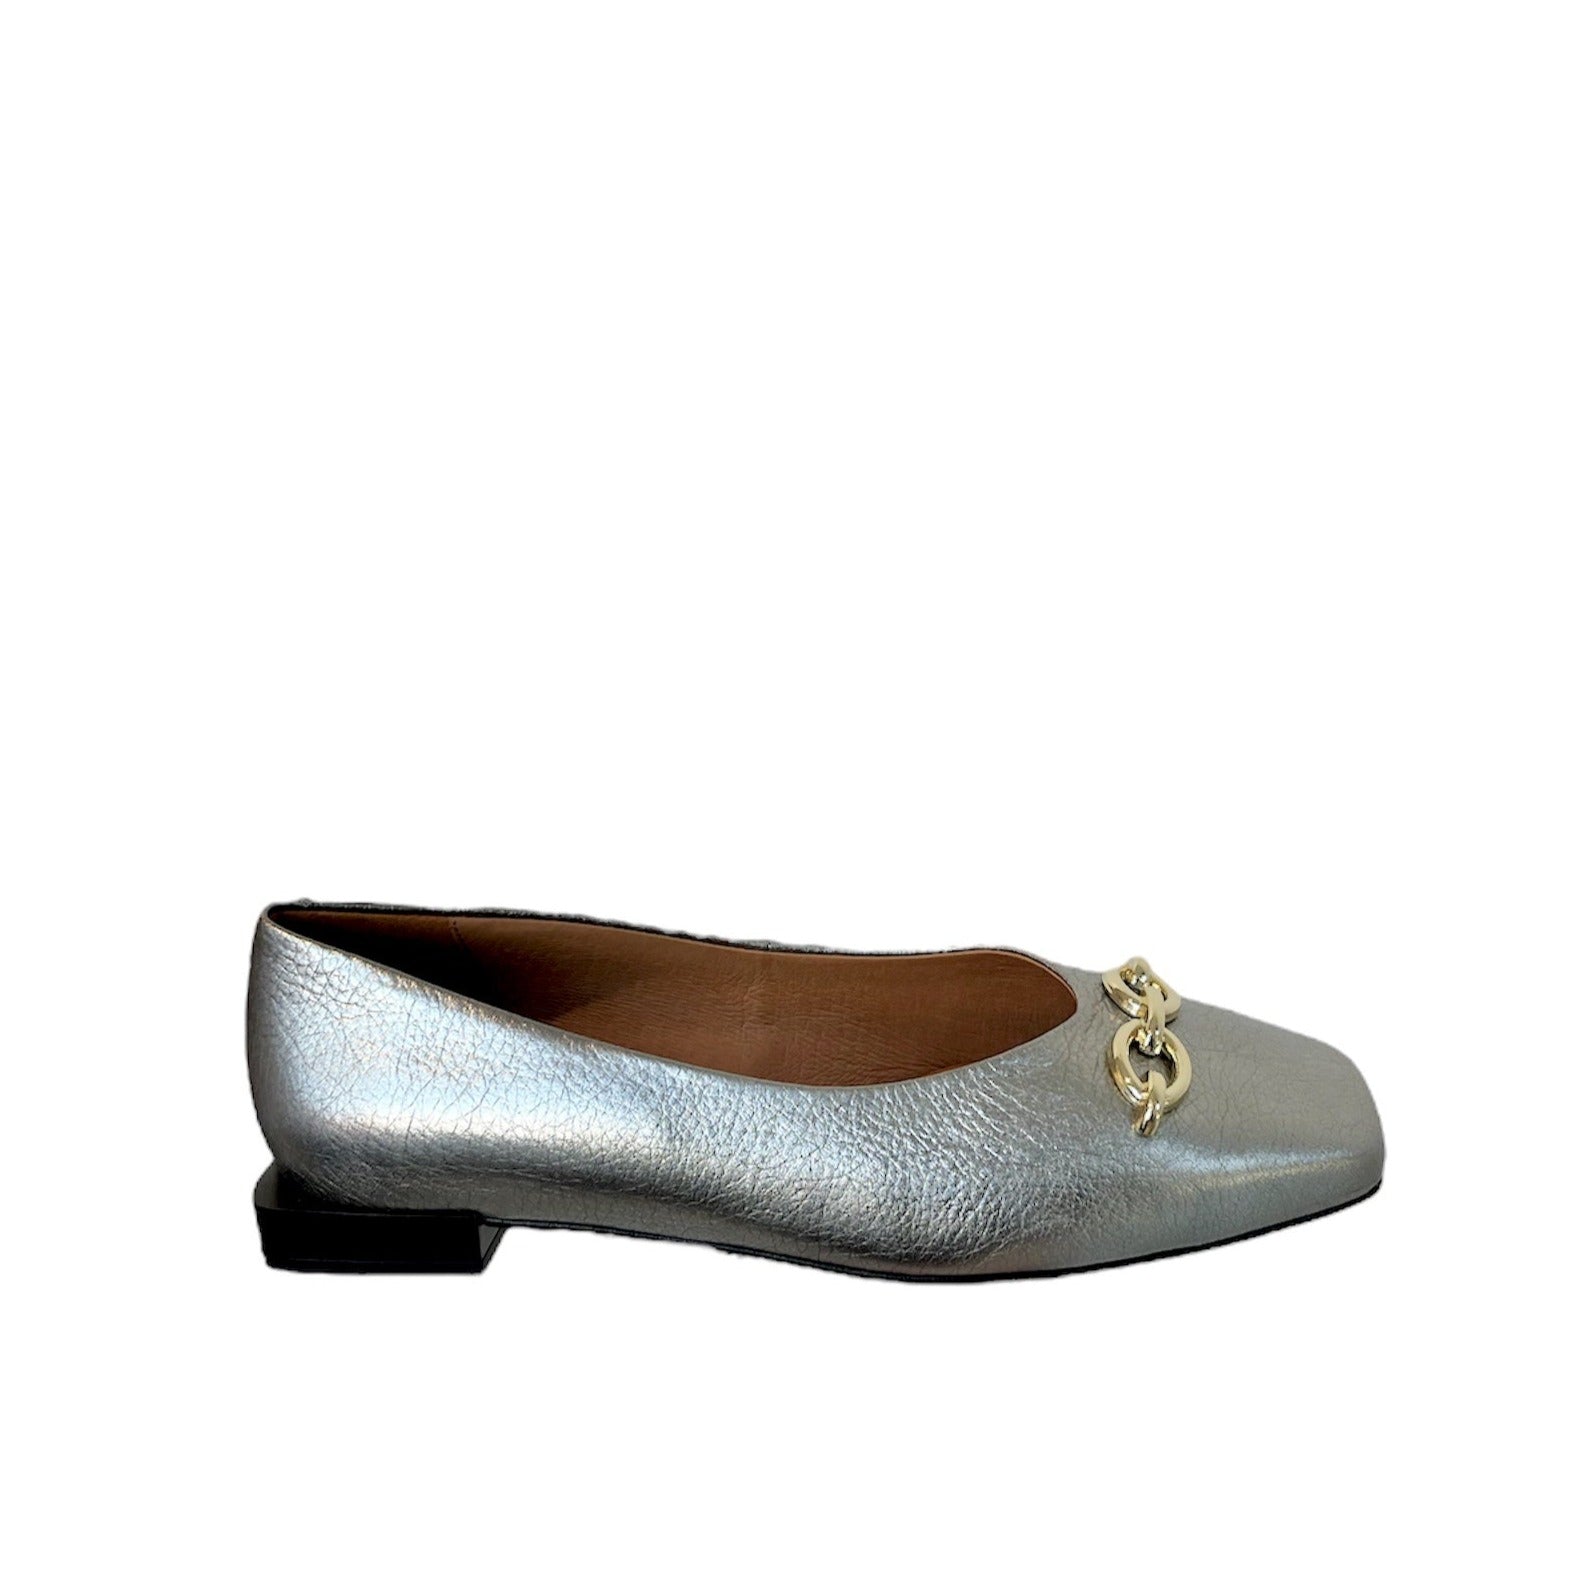 ANGEL ALARCON - HASPE LOAFER 23515-535A IN SILVER LEATHER